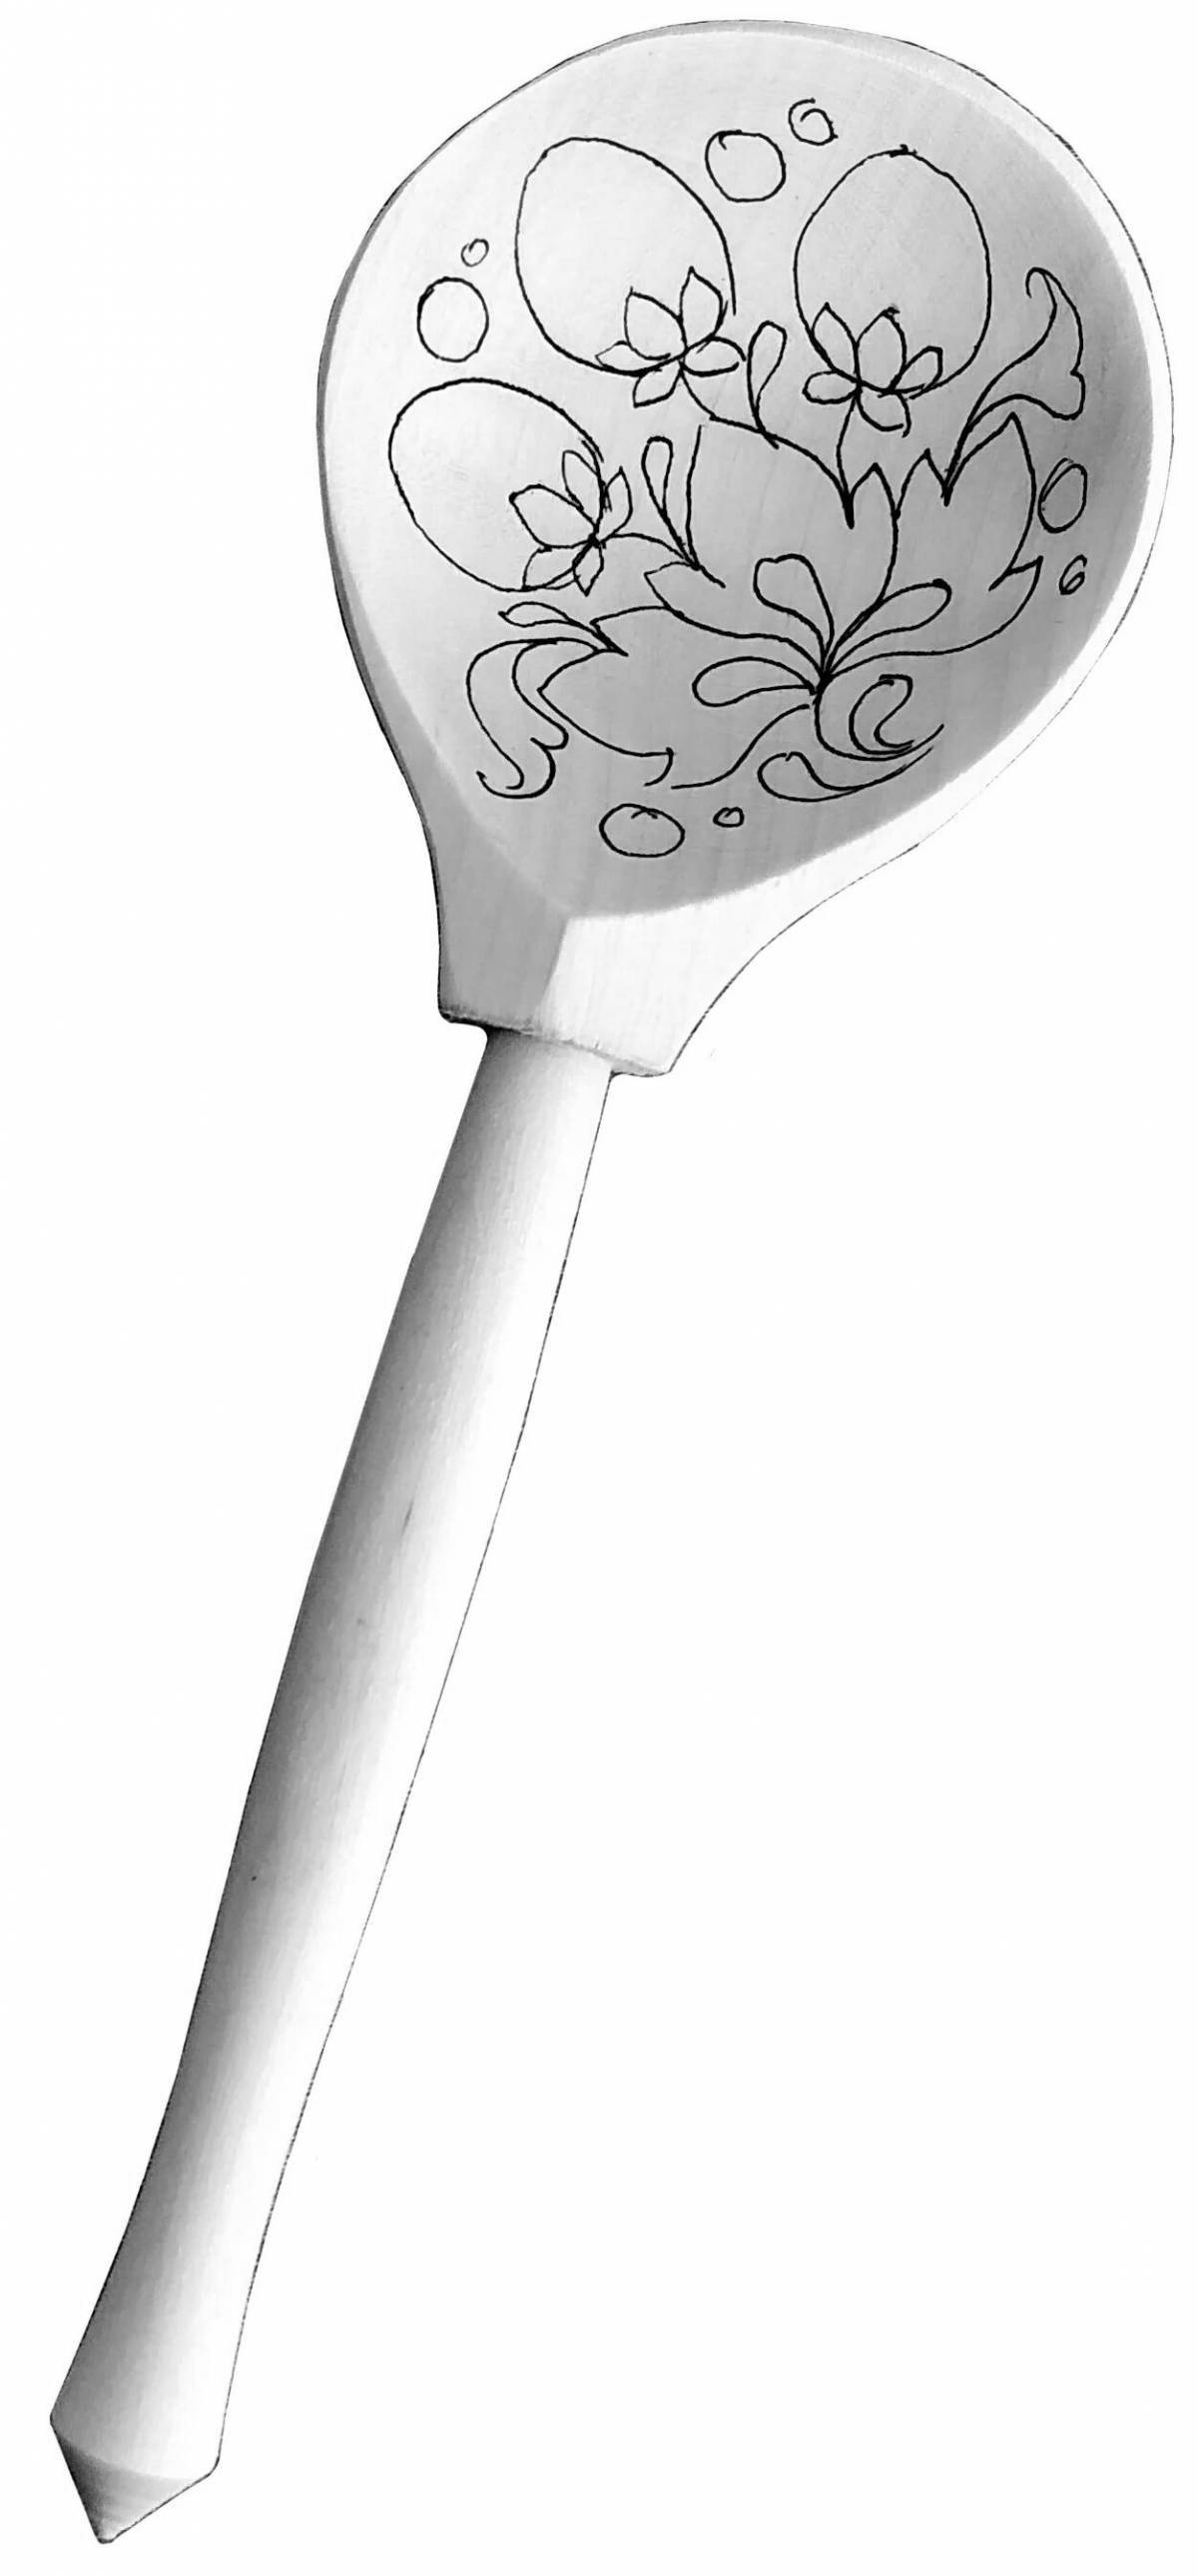 Shiny Painted Spoon Coloring Page